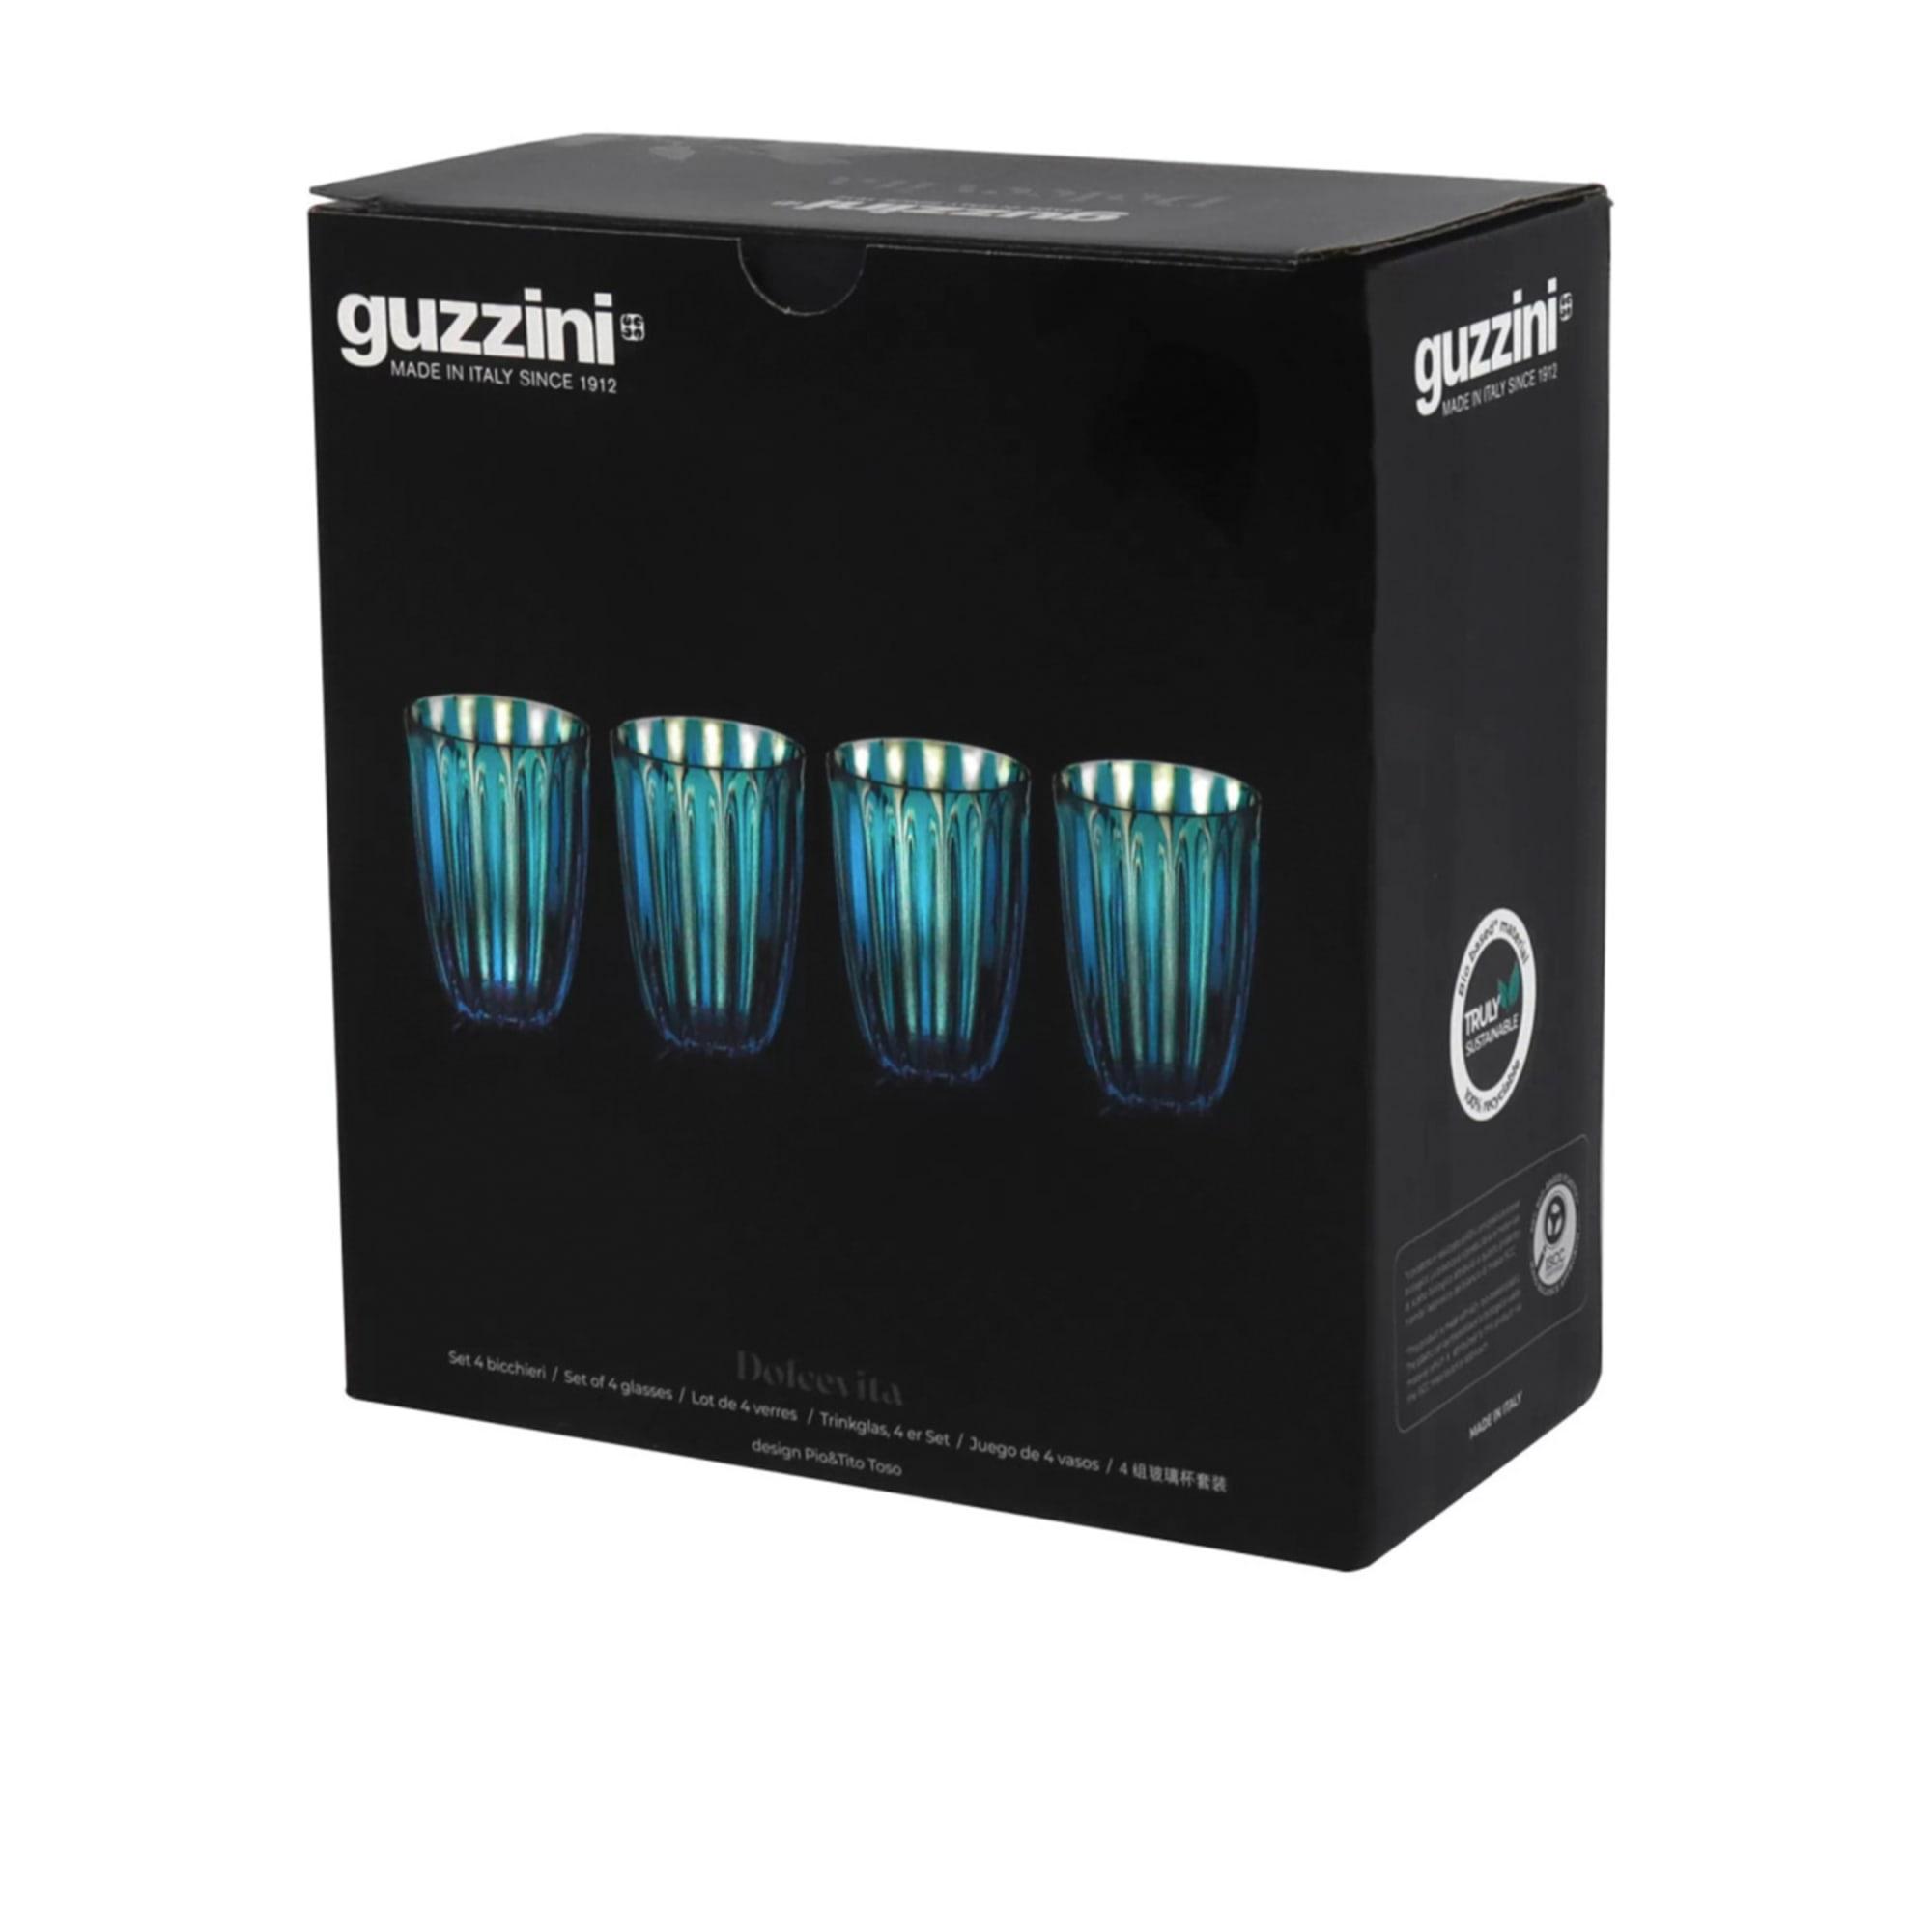 Guzzini Dolcevita Tumblers .5L Set of 4 Mother of Pearl Image 4